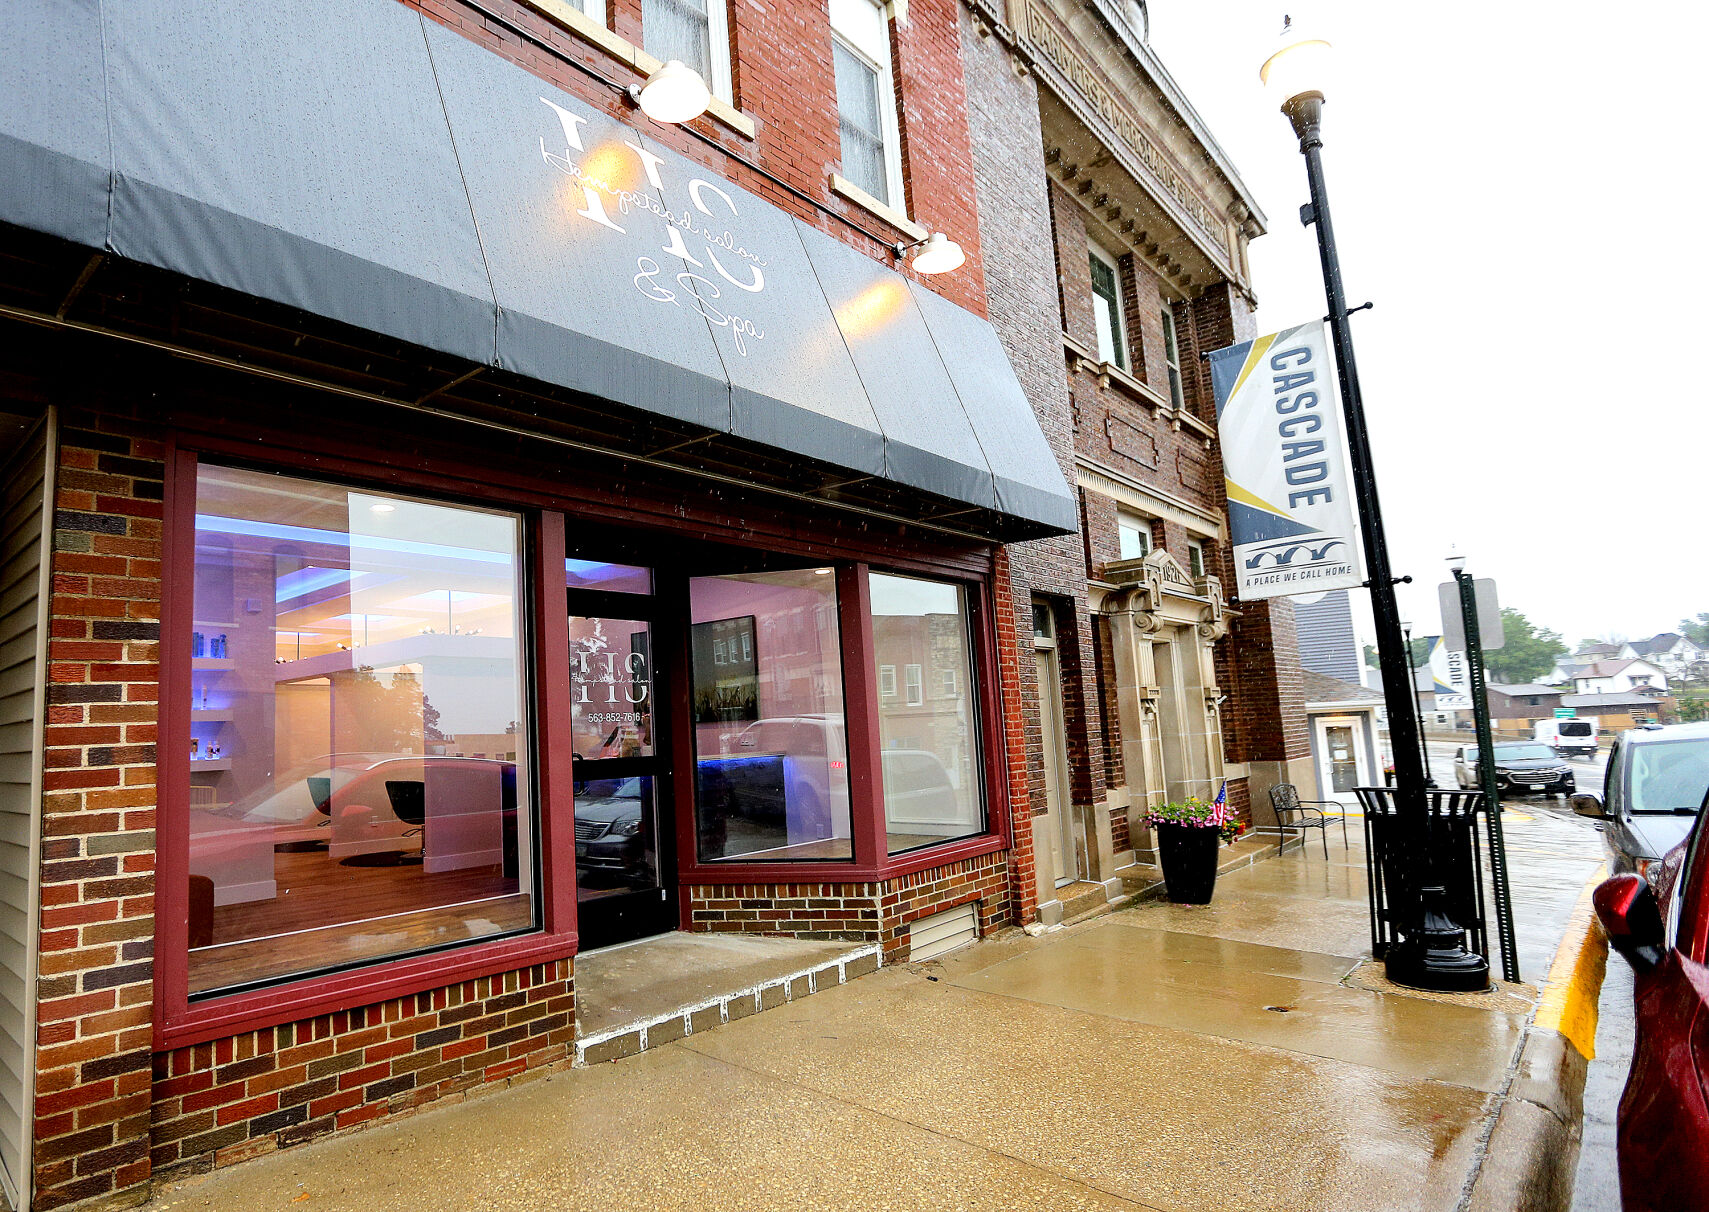 Hempstead Salon is located at 206 First Ave. W. in Cascade, Iowa.    PHOTO CREDIT: Dave Kettering